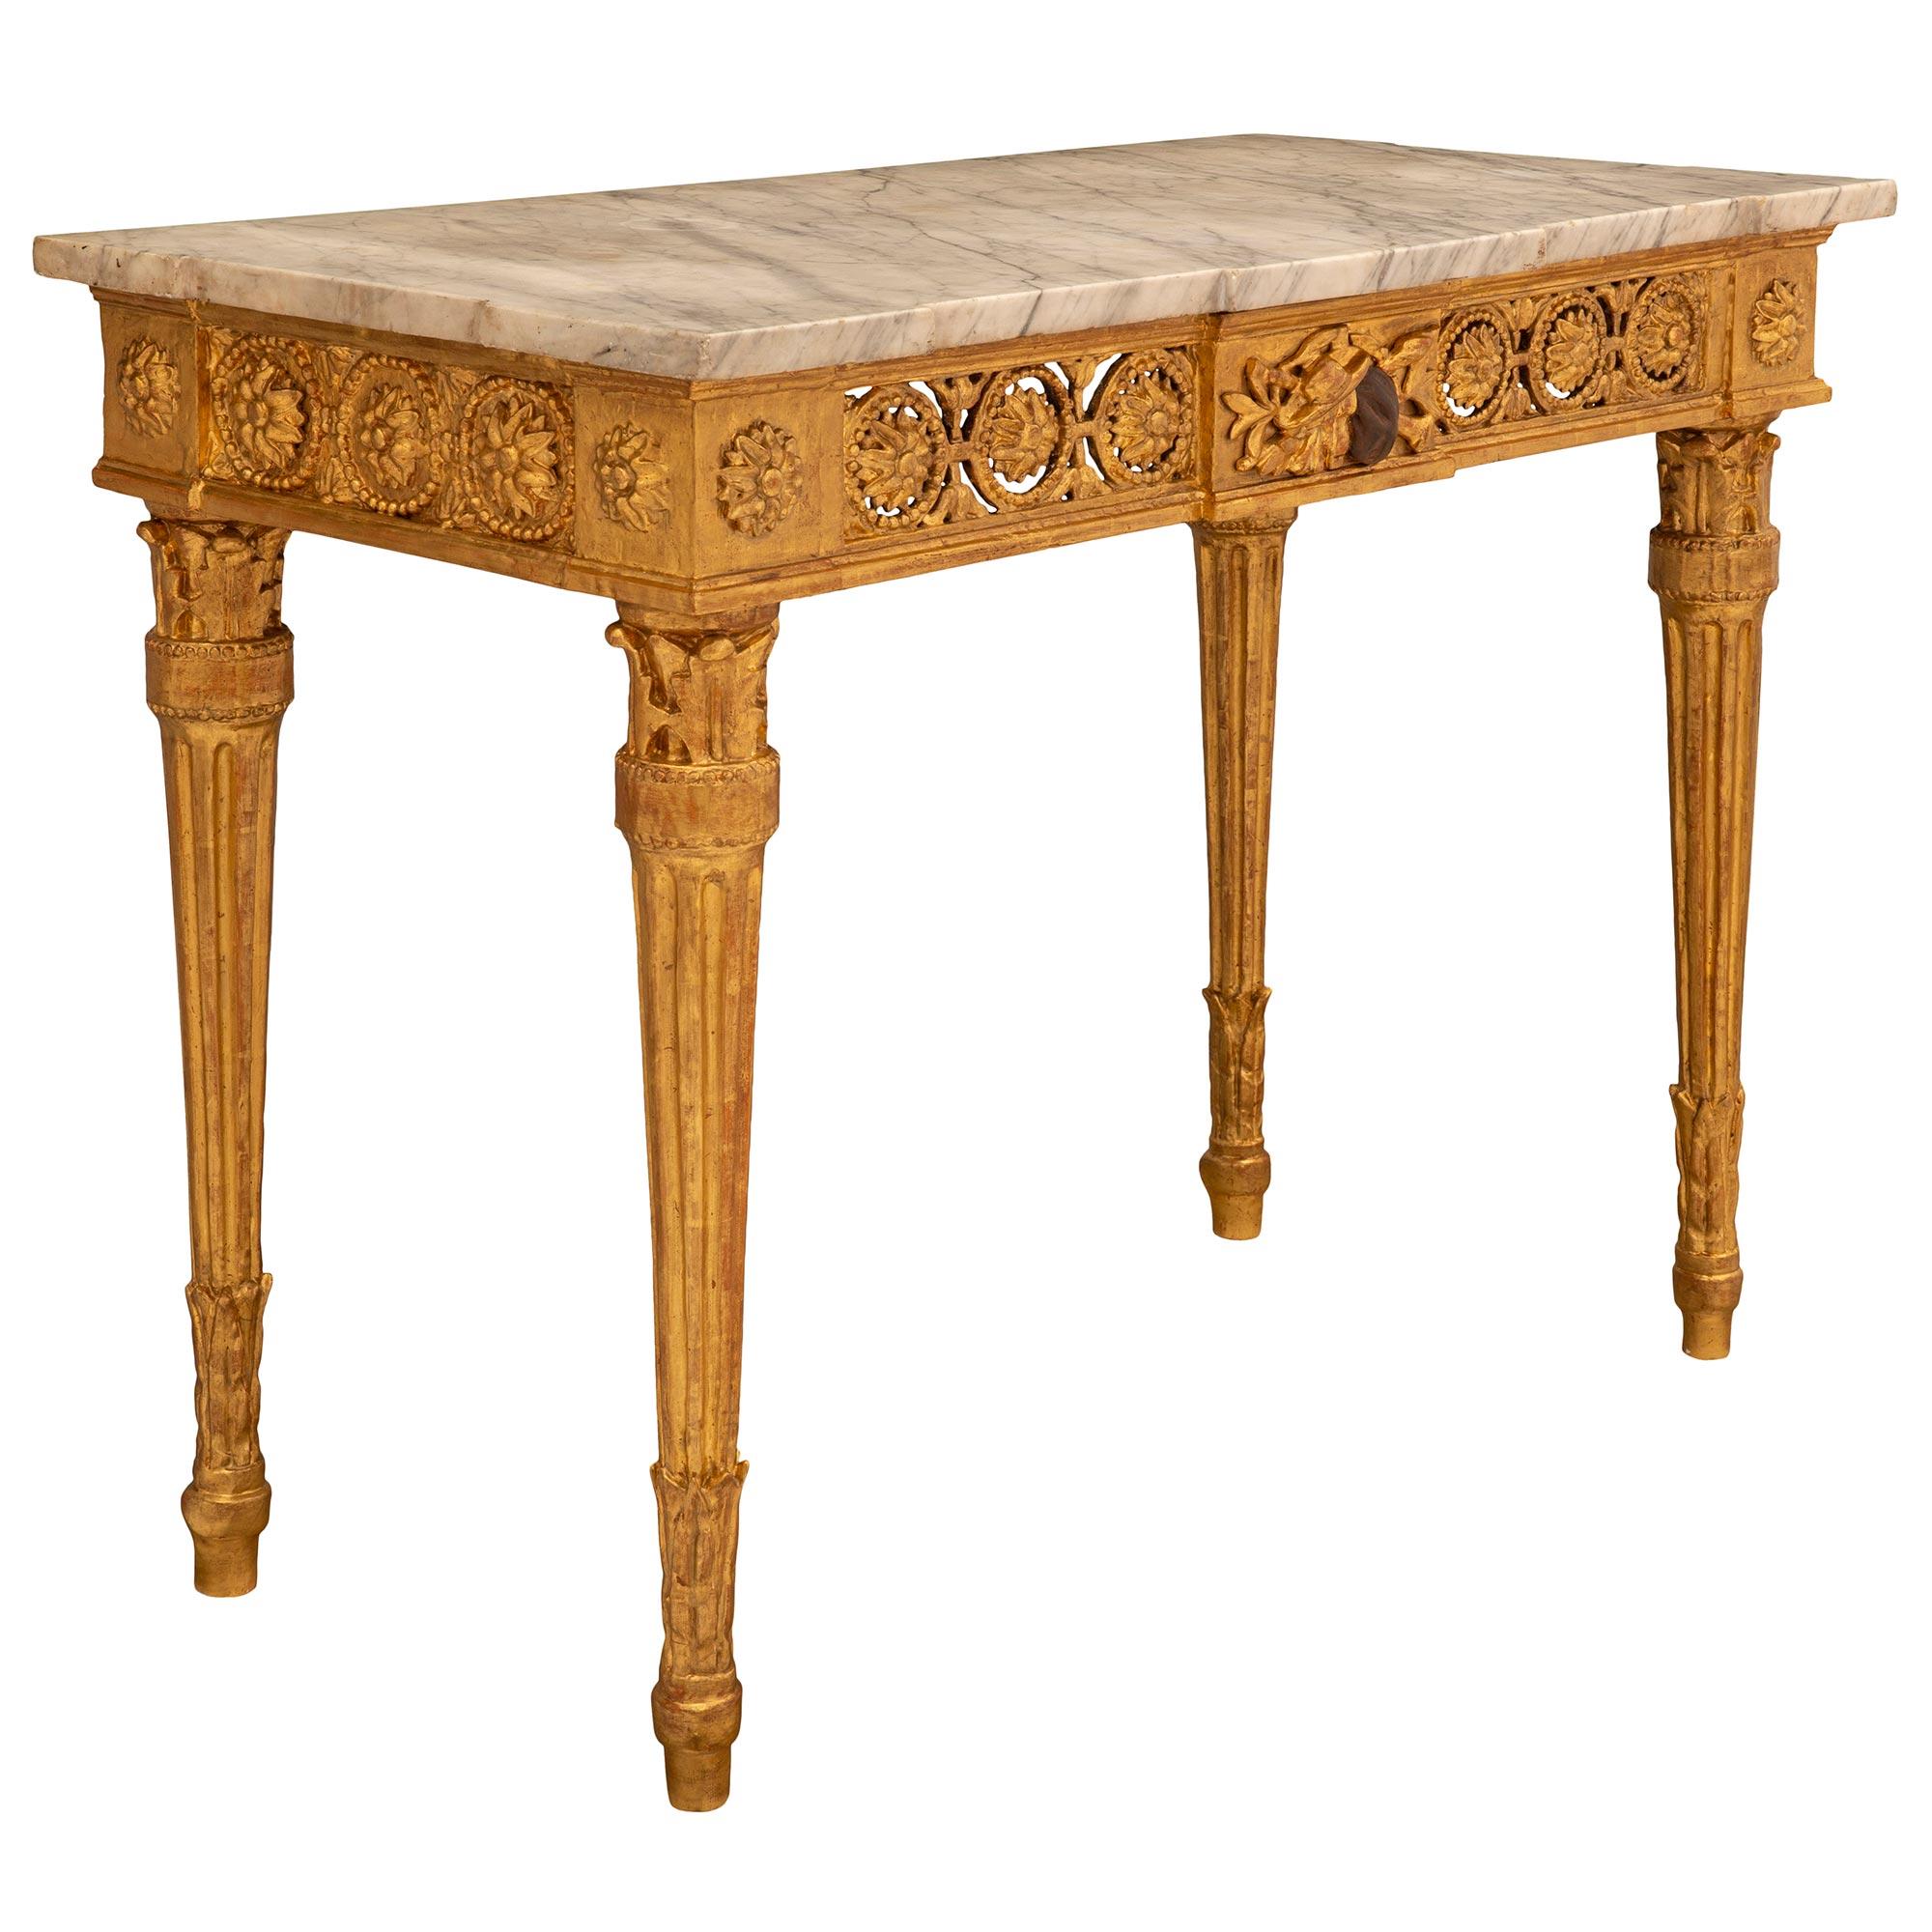 Italian 18th Century Louis XVI Period Giltwood, Polychrome and Marble Console In Good Condition For Sale In West Palm Beach, FL